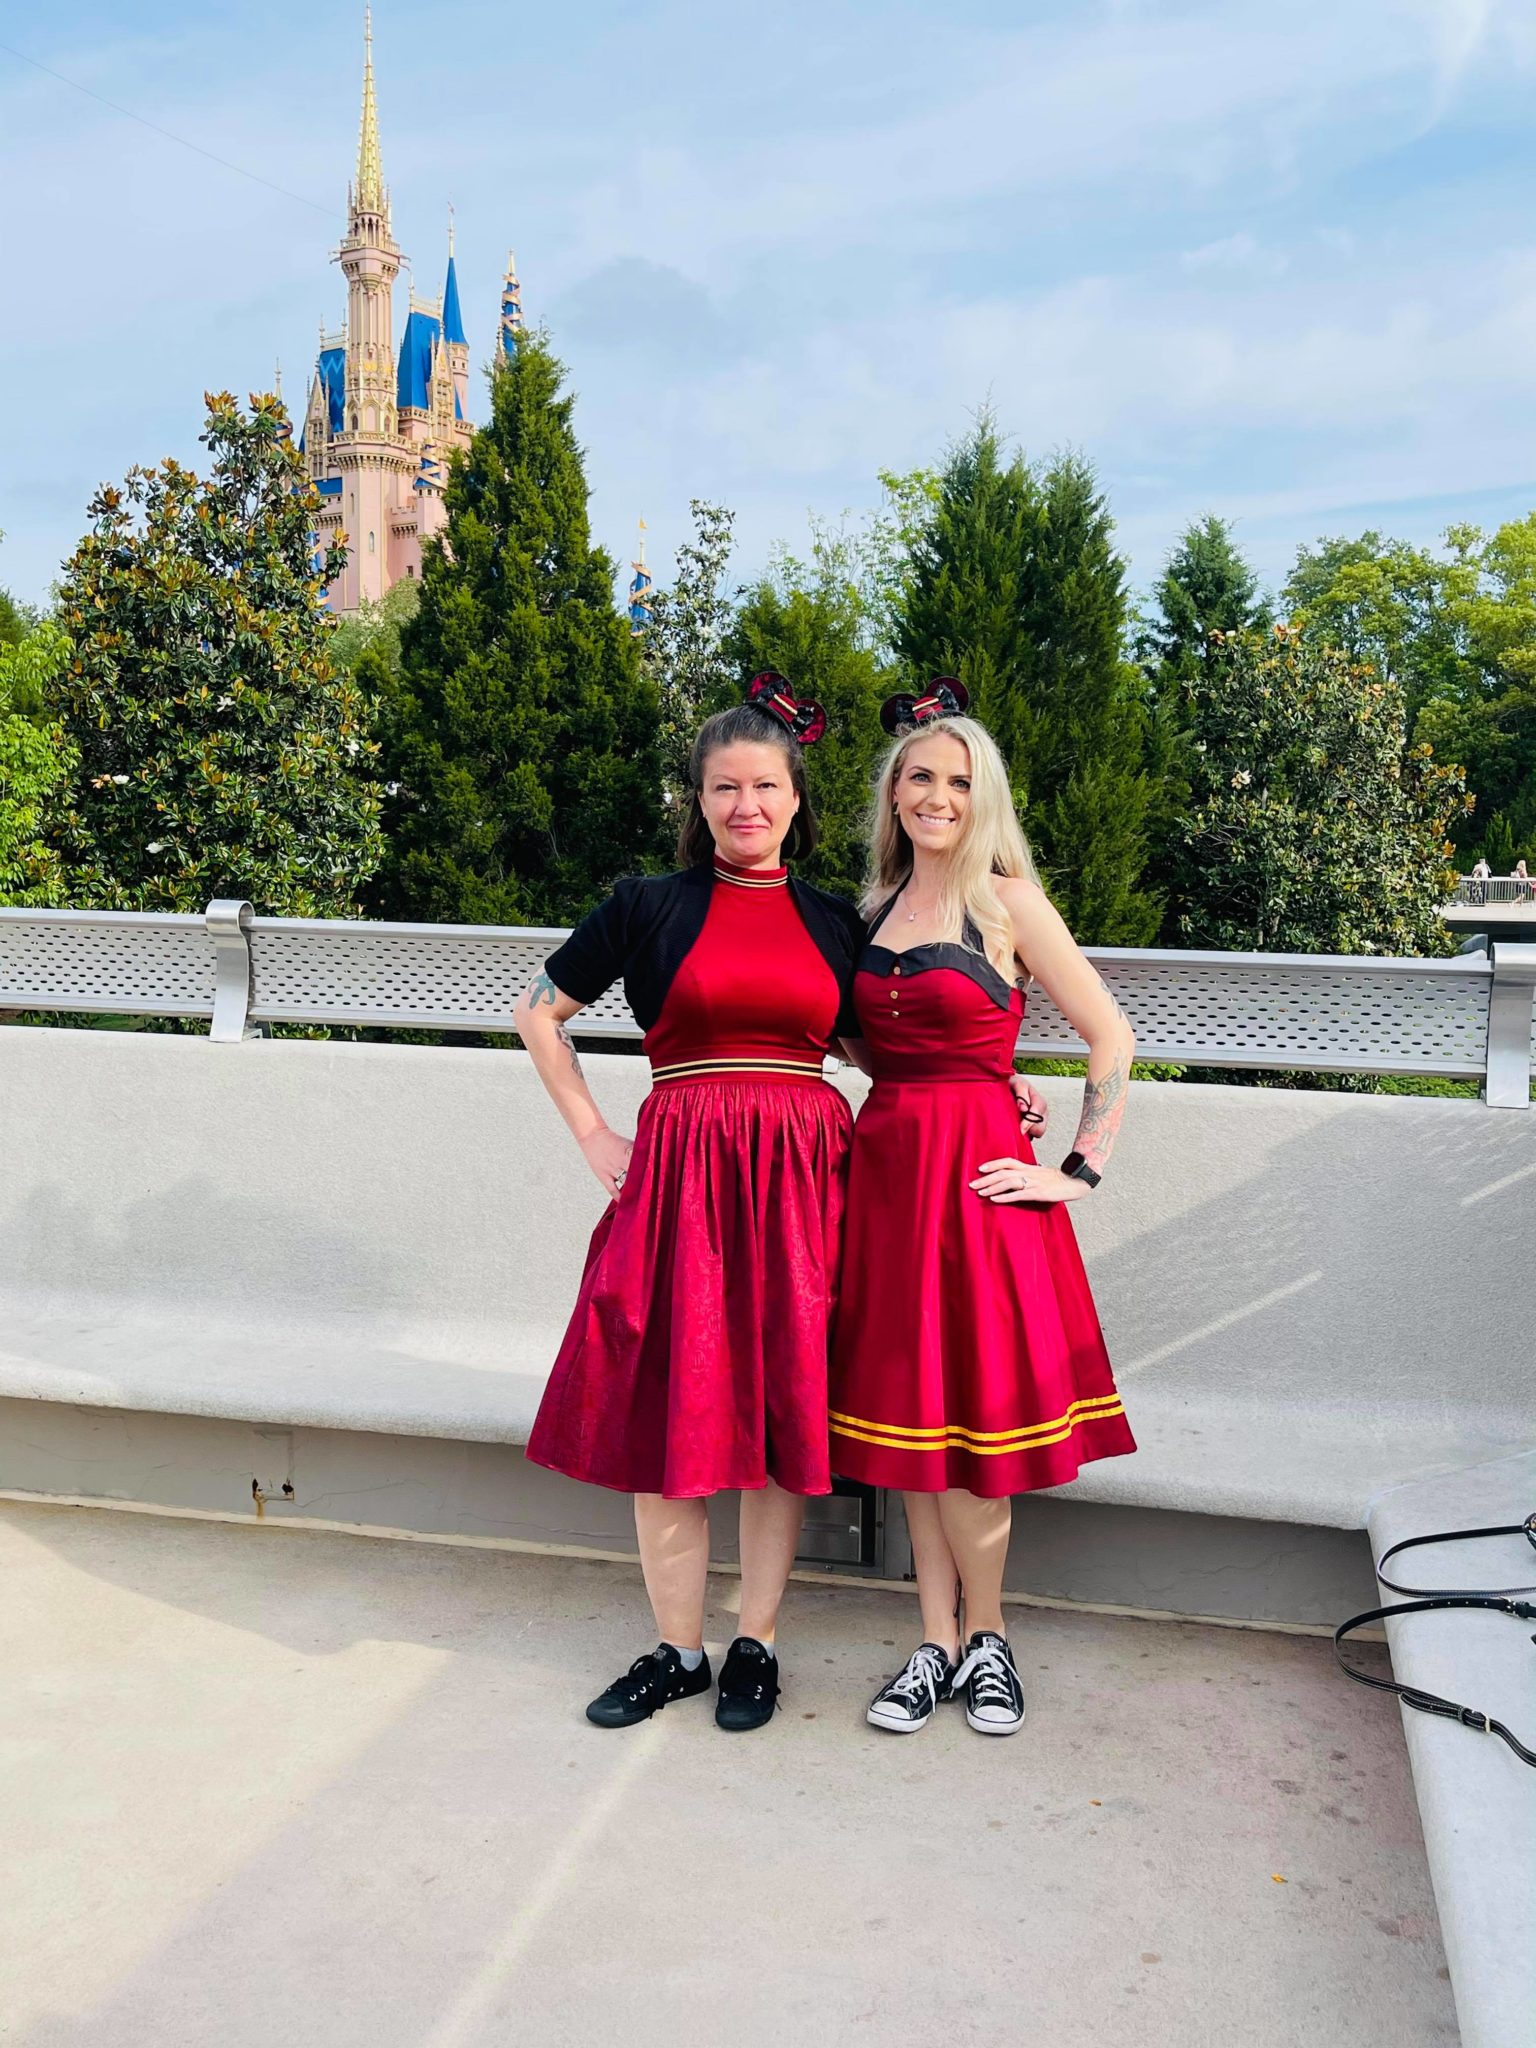 Get a First Look At This Year's Dapper Day Outfits At Disney World